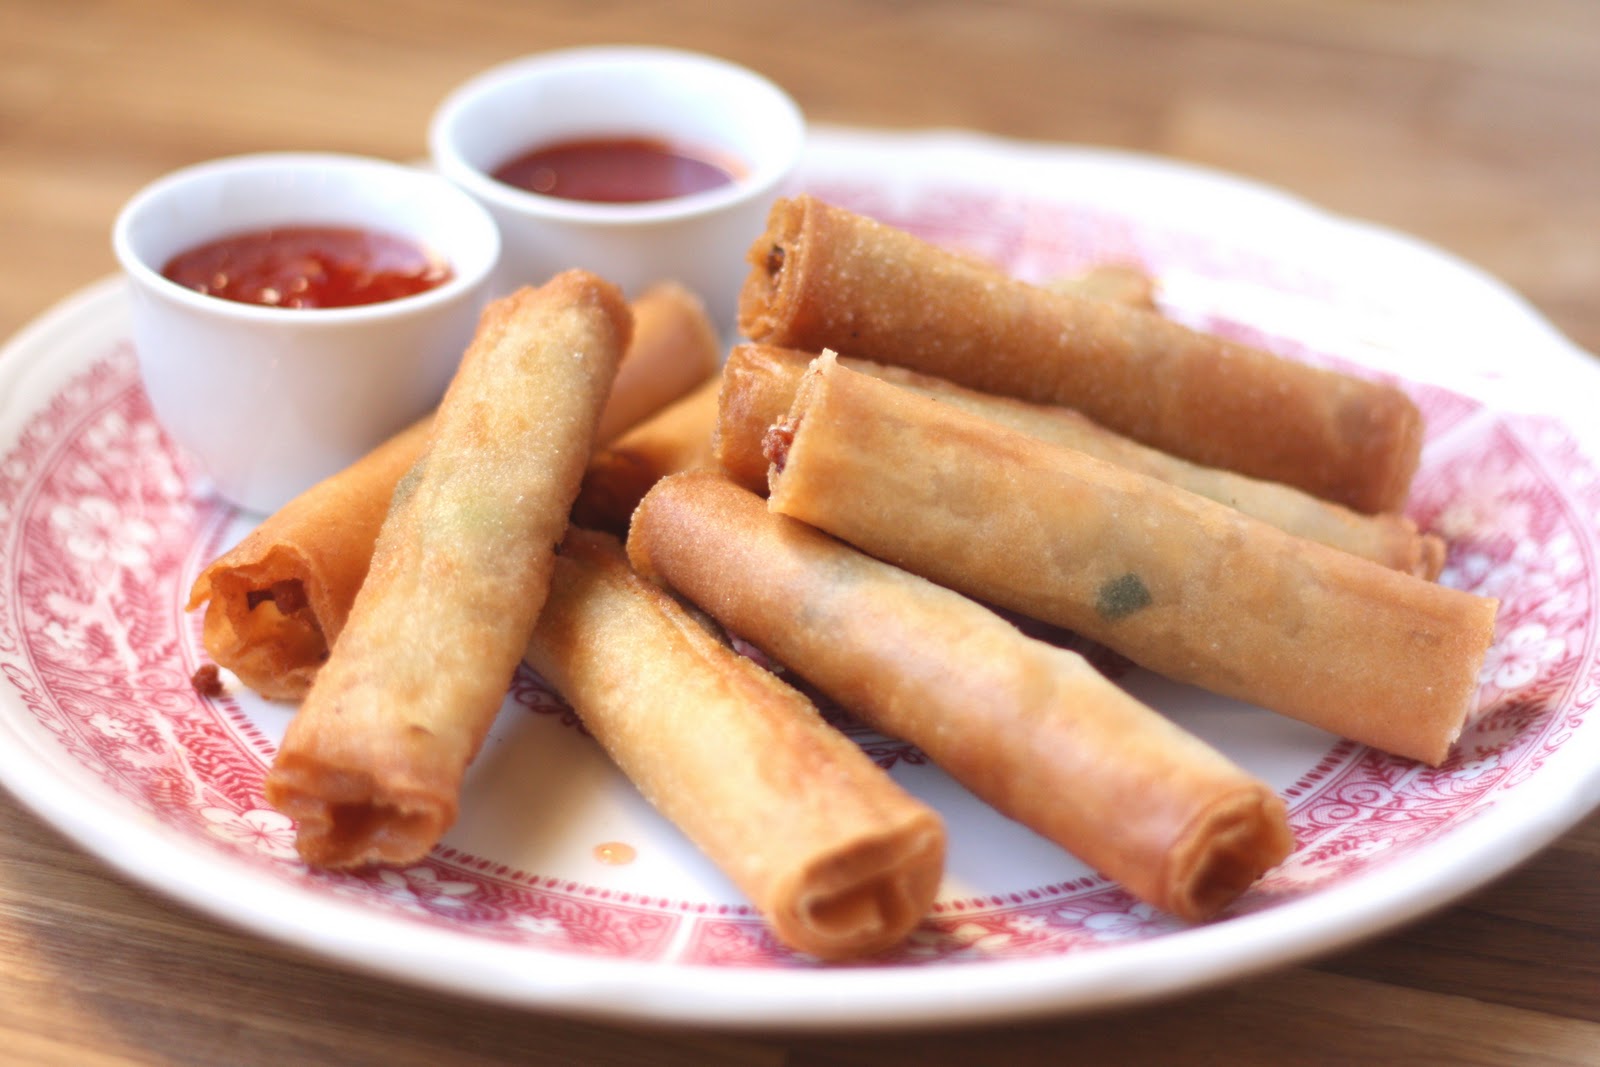 Lumpia is a take on the spring roll. Pic: Thom's Kitchen